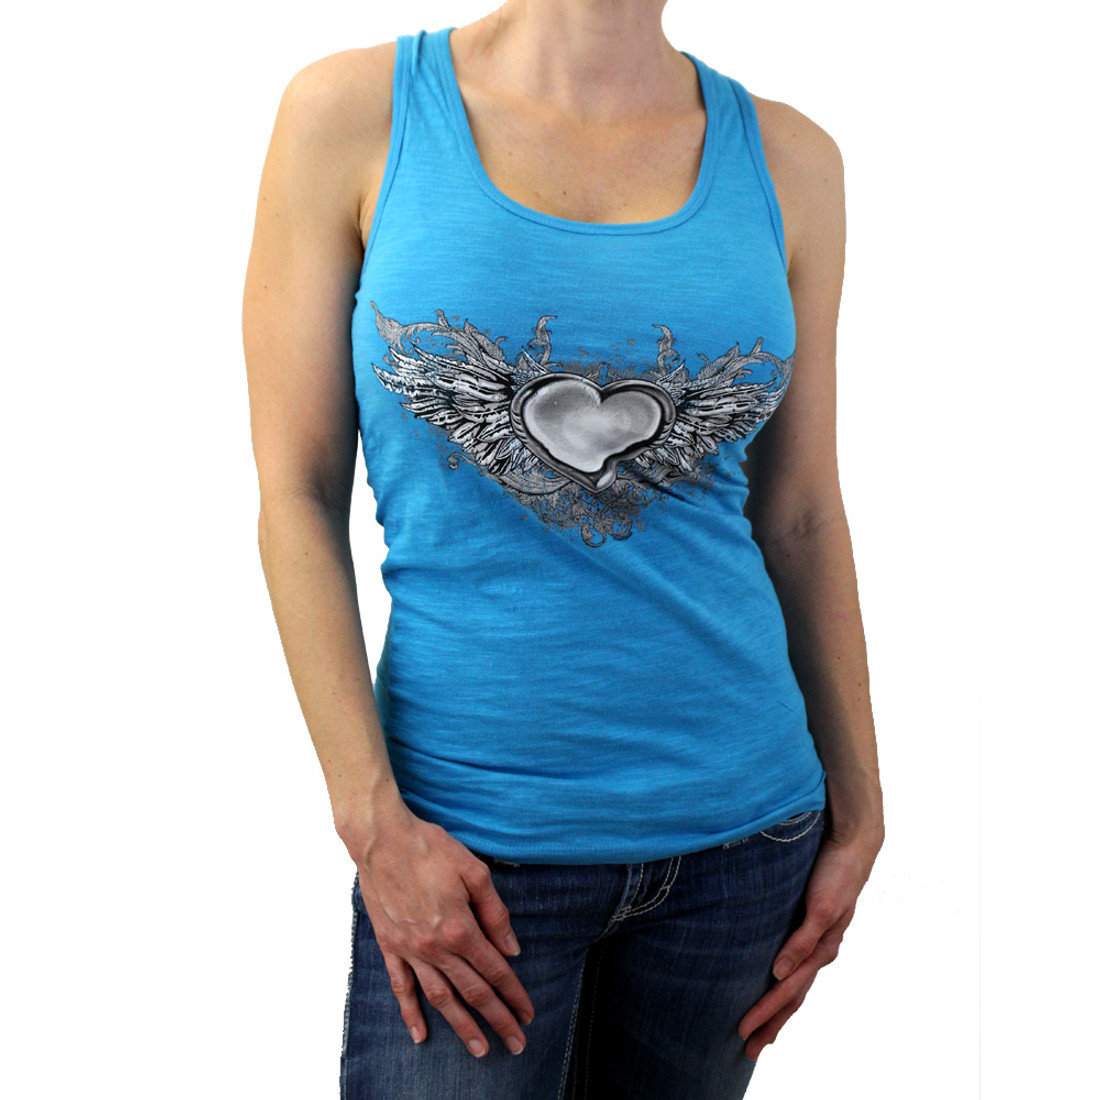 Turquoise blue racerback tank top with heart and wings.